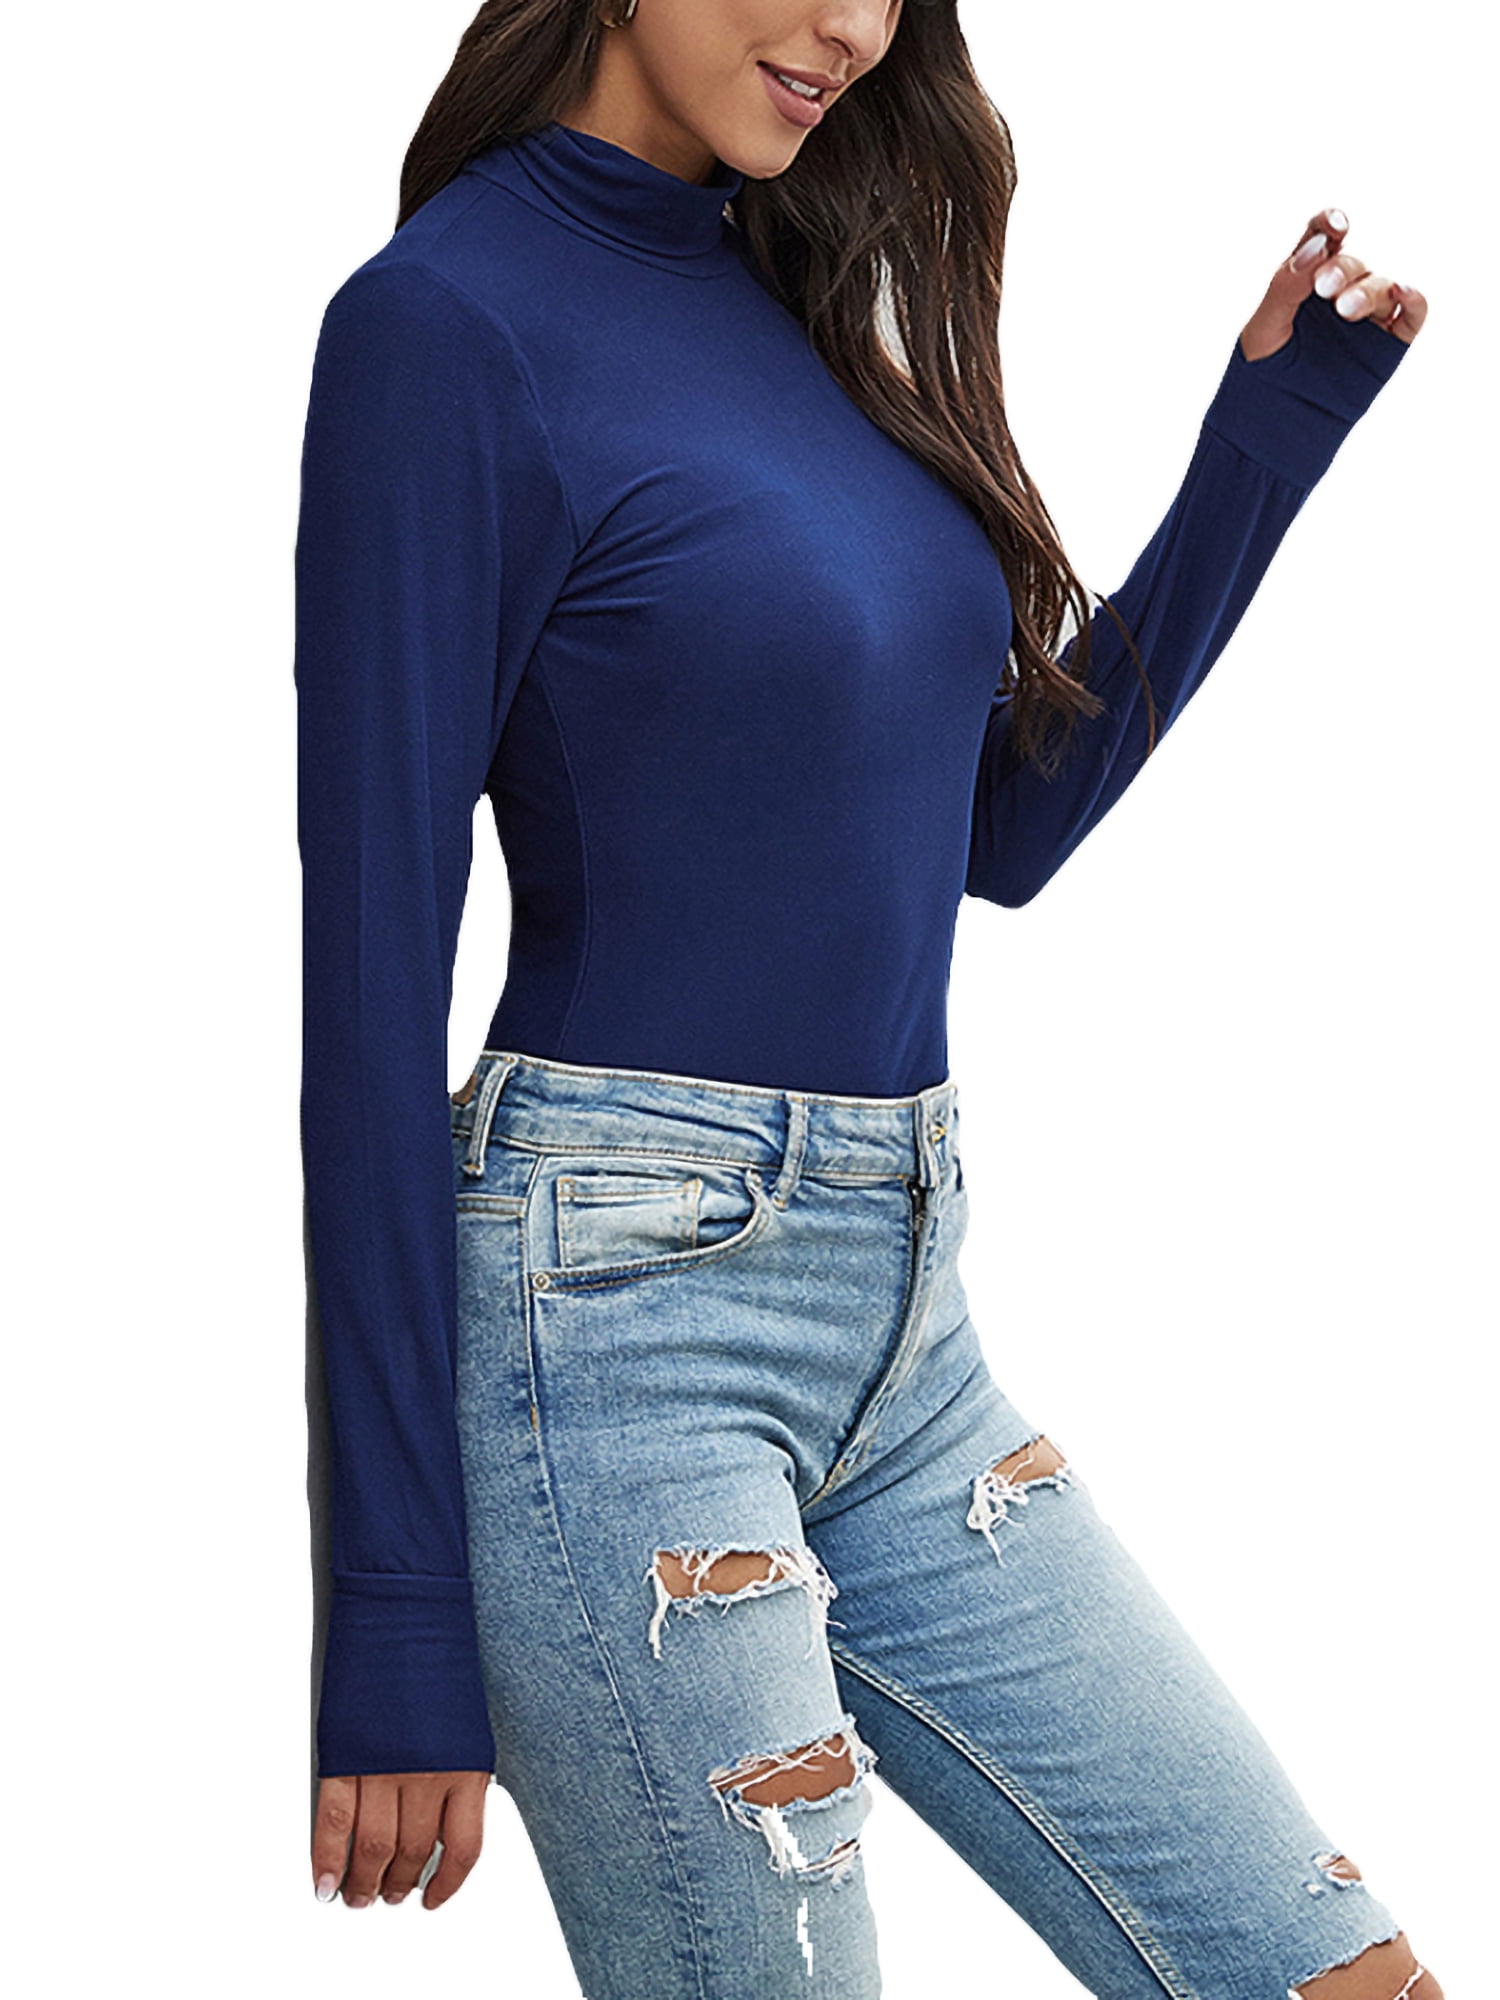 ouxiuli Women Basic Solid Slim Fit Long Sleeve Casual Turtleneck Tops T-Shirt